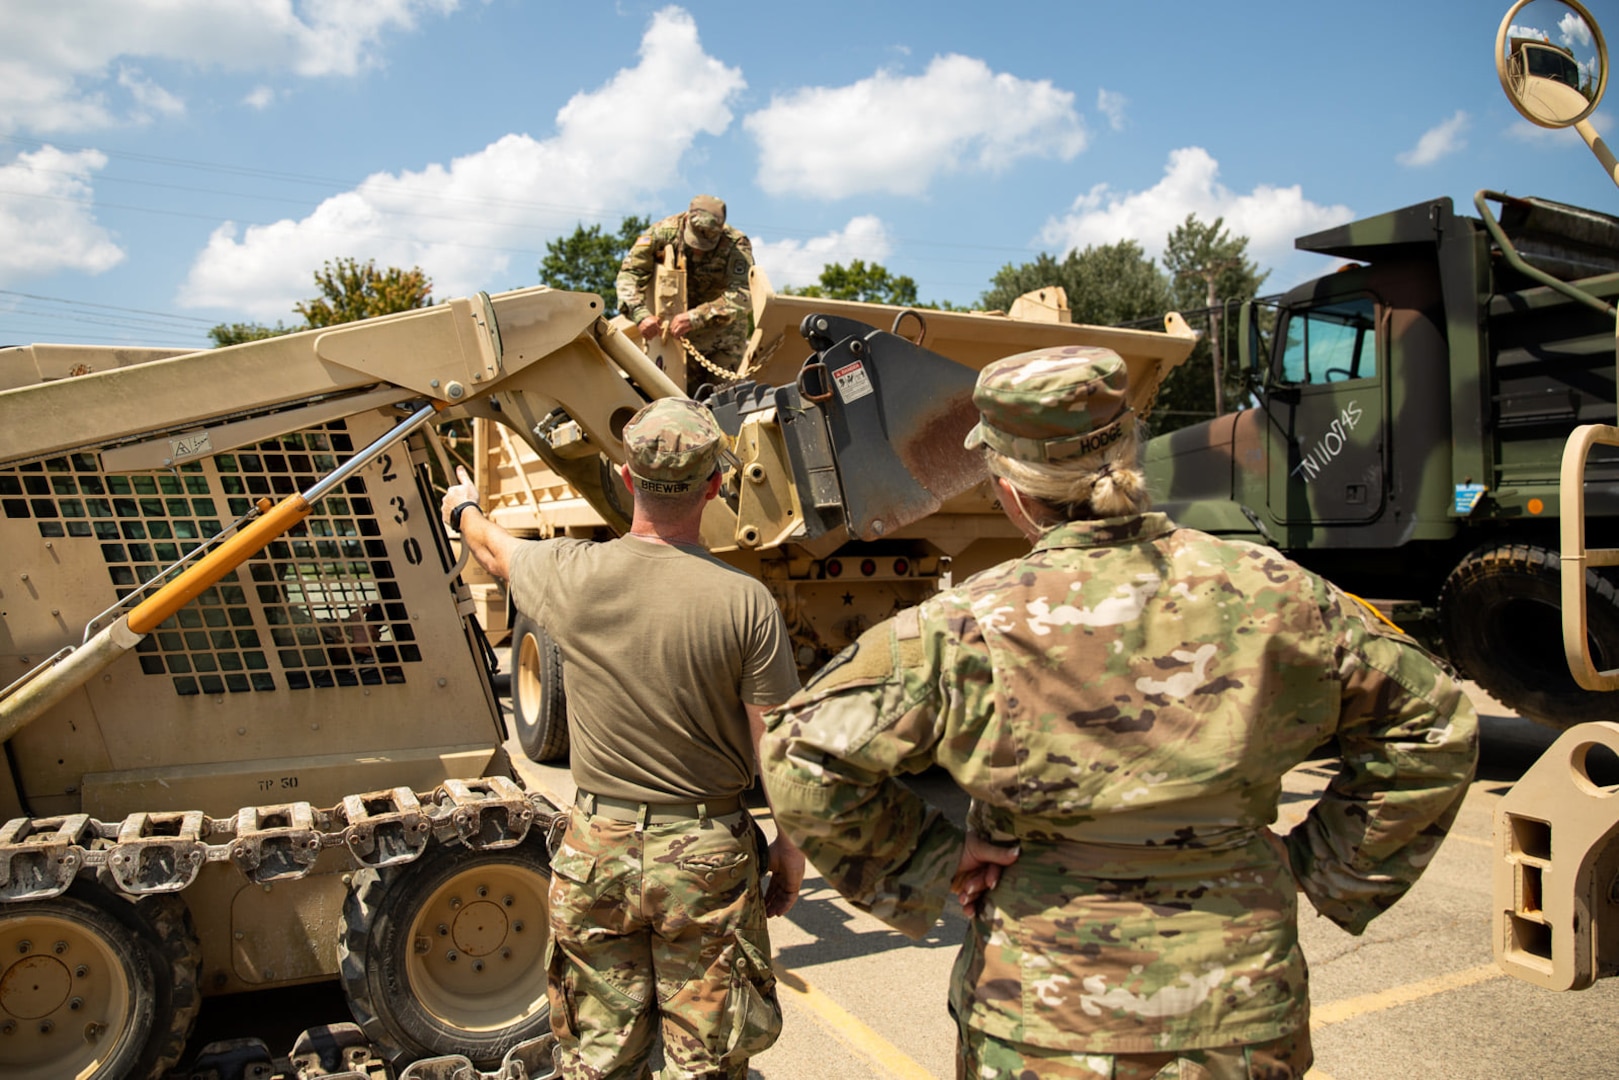 More than 80 Tennessee National Guard Soldiers and Airmen are cleaning up debris and providing traffic control and security to assist state and local agencies following severe flooding in Humphreys County.